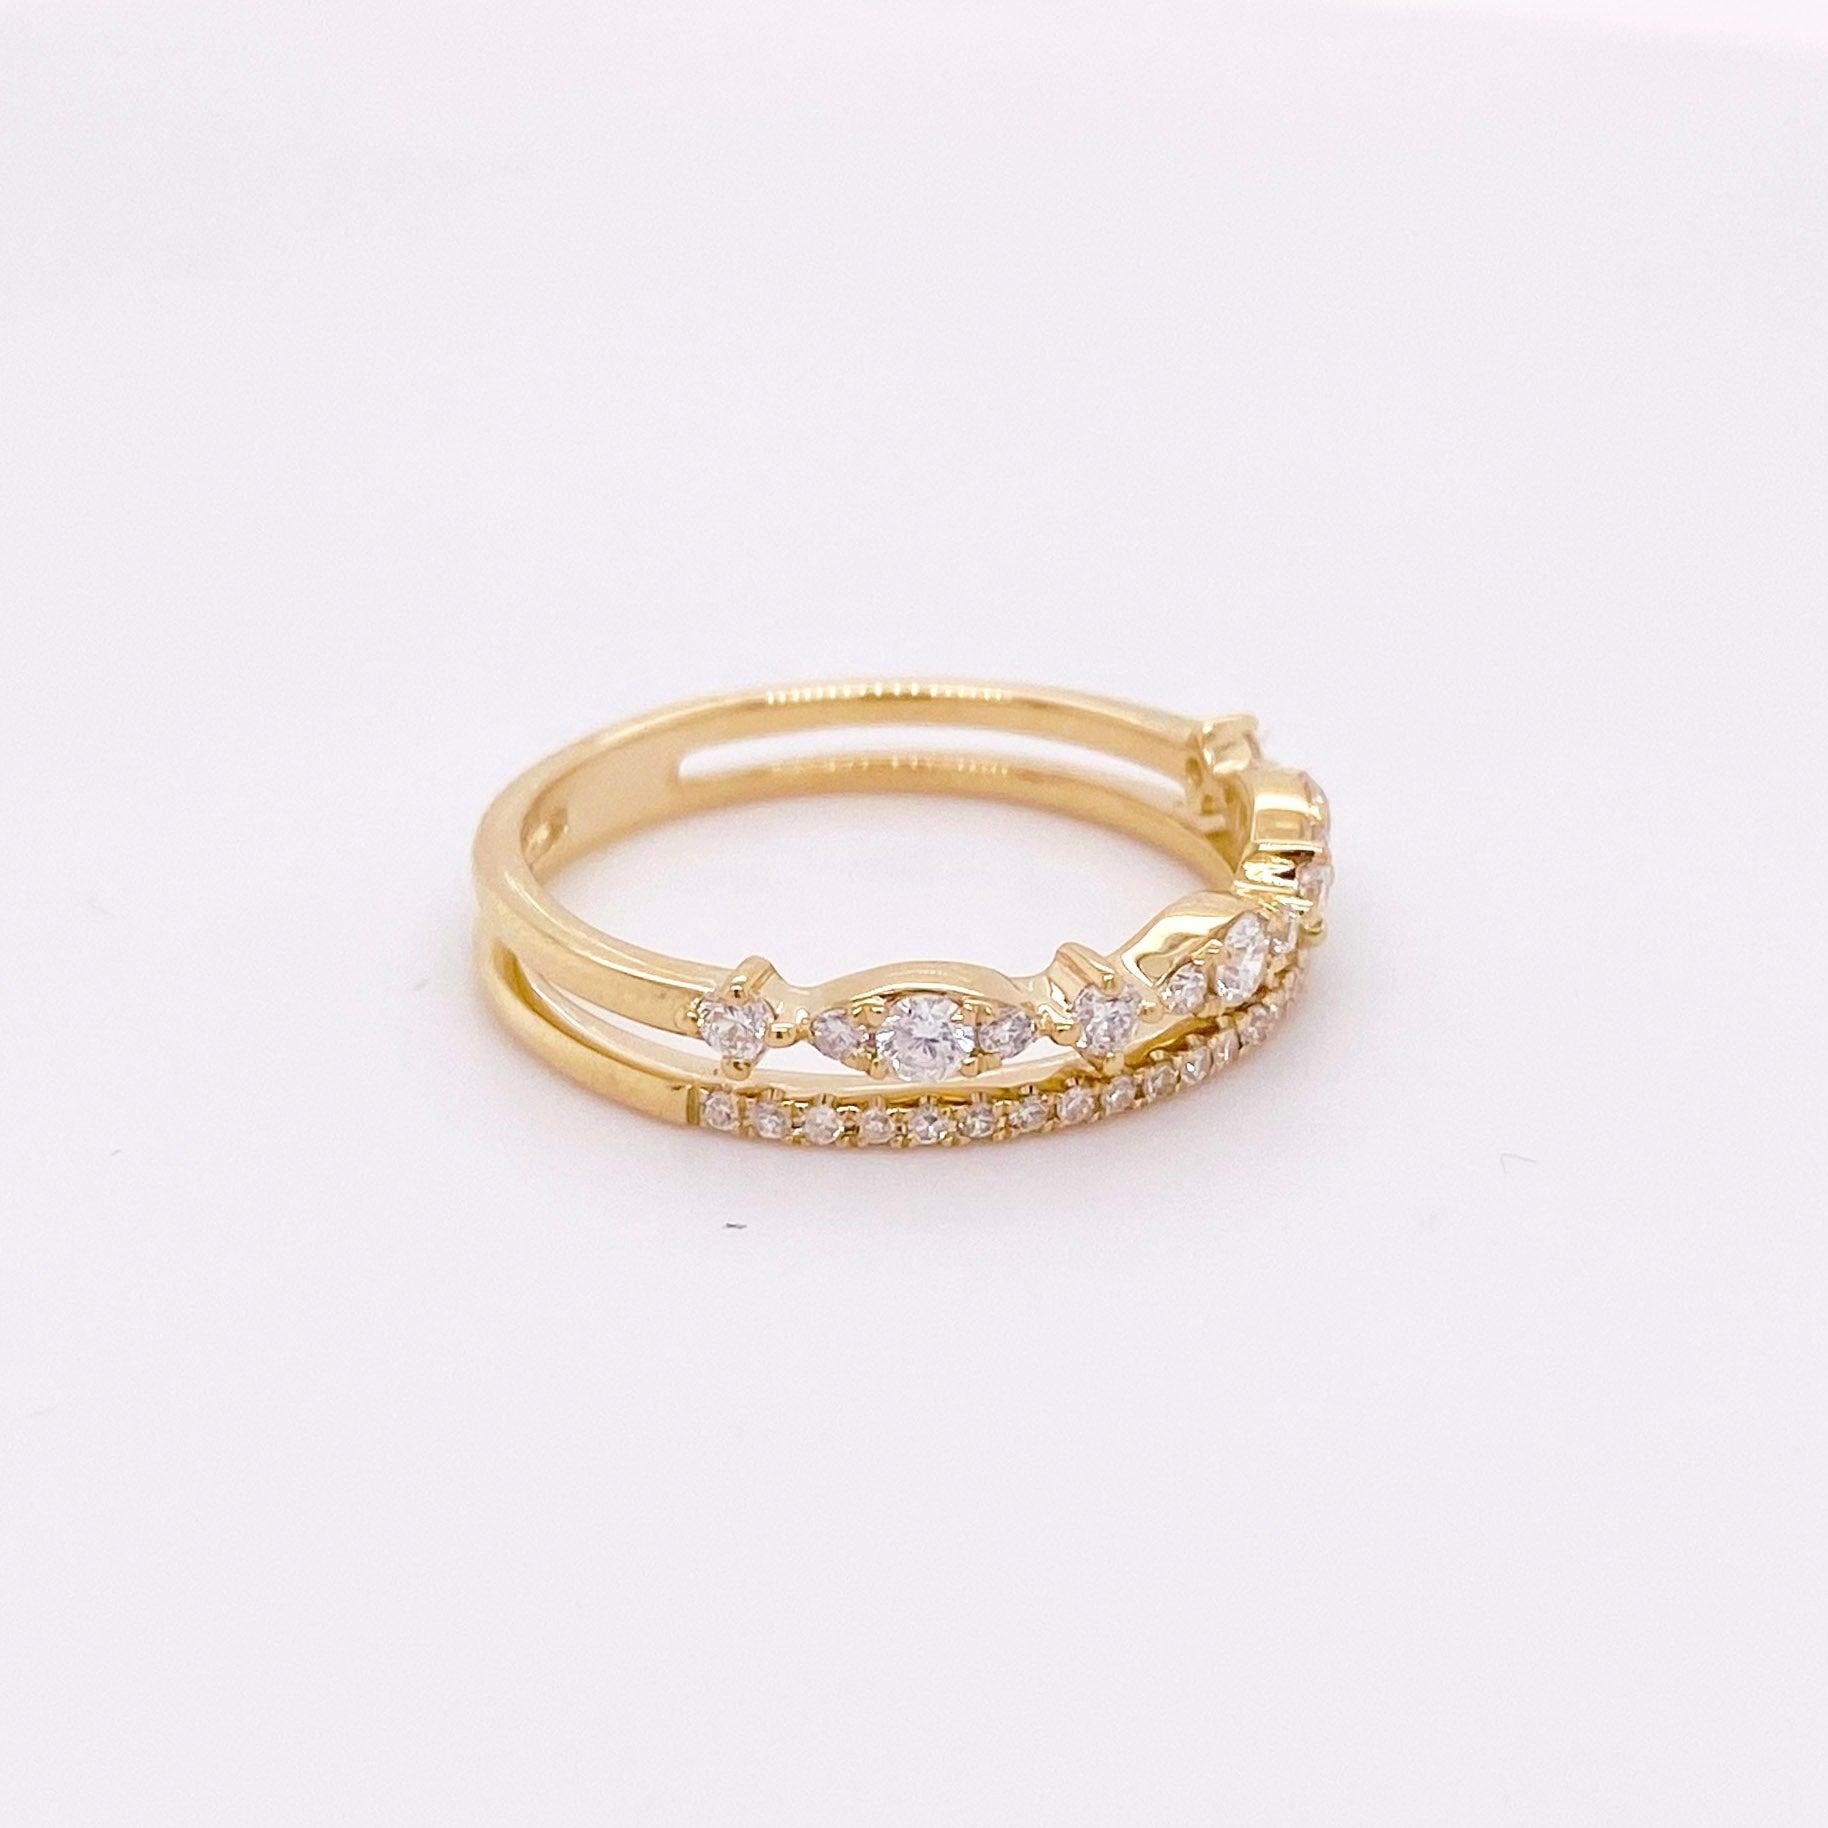 For Sale:  Diamond Duet Ring, 14 Karat Gold Diamond Double Band Ring, Stackable Ring 3